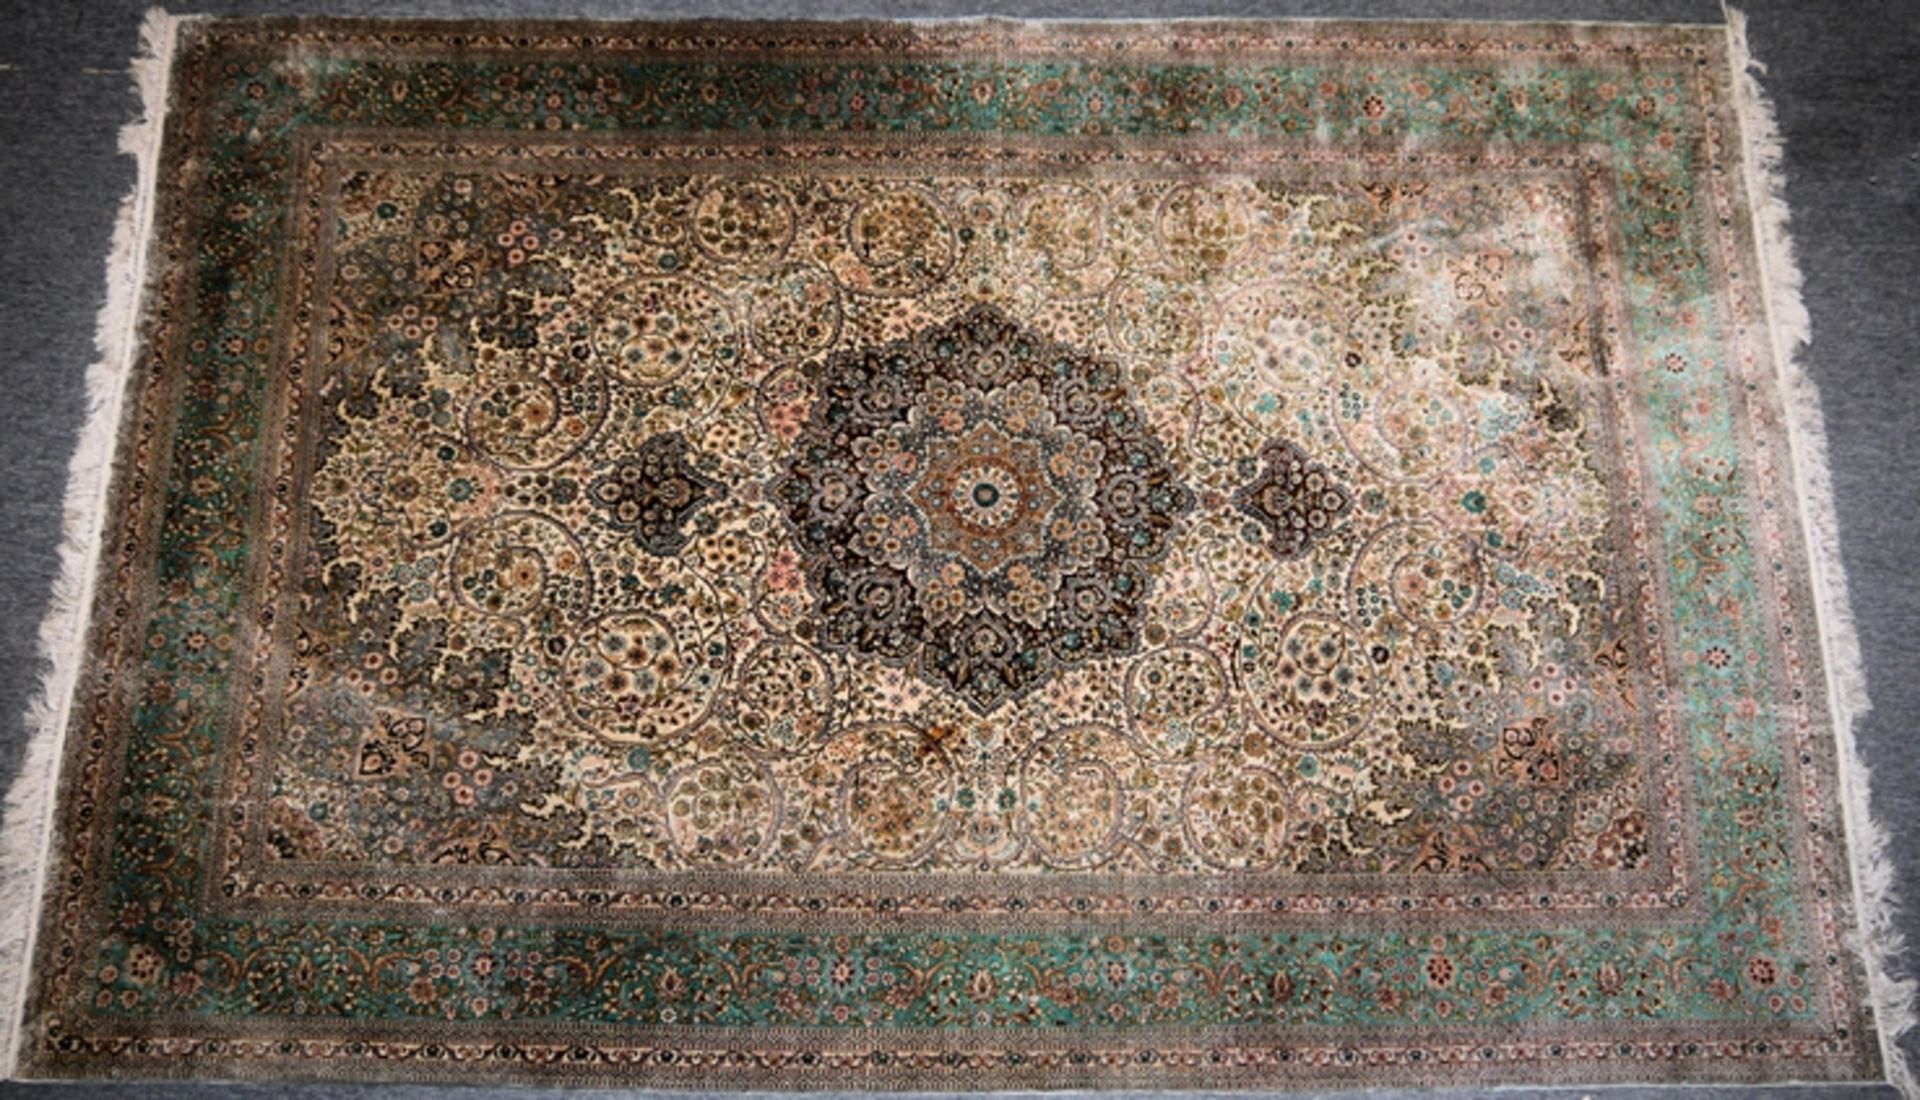 Oriental silk rug, Tabriz, China, approx. 50-60 years old, very fine weave